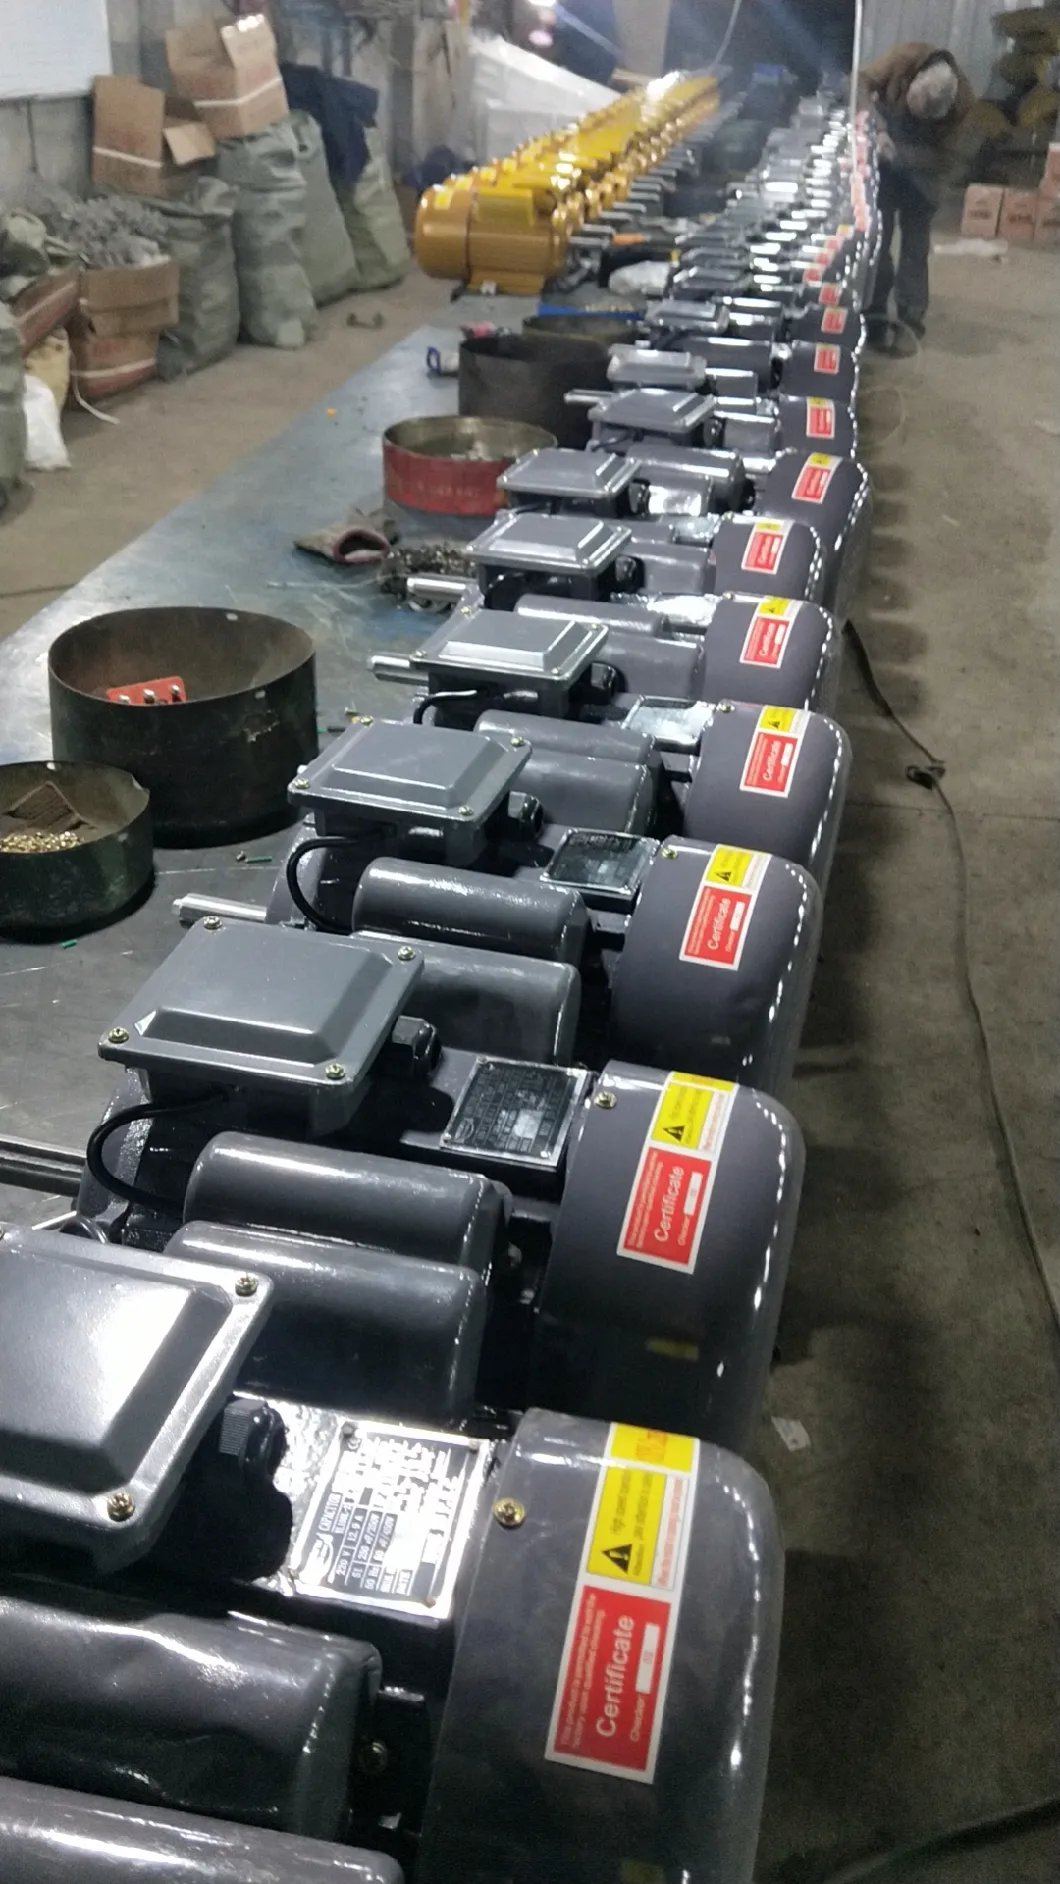 Factory Price 2.8kw Single-Phase AC Motor for Agricultural Machinery